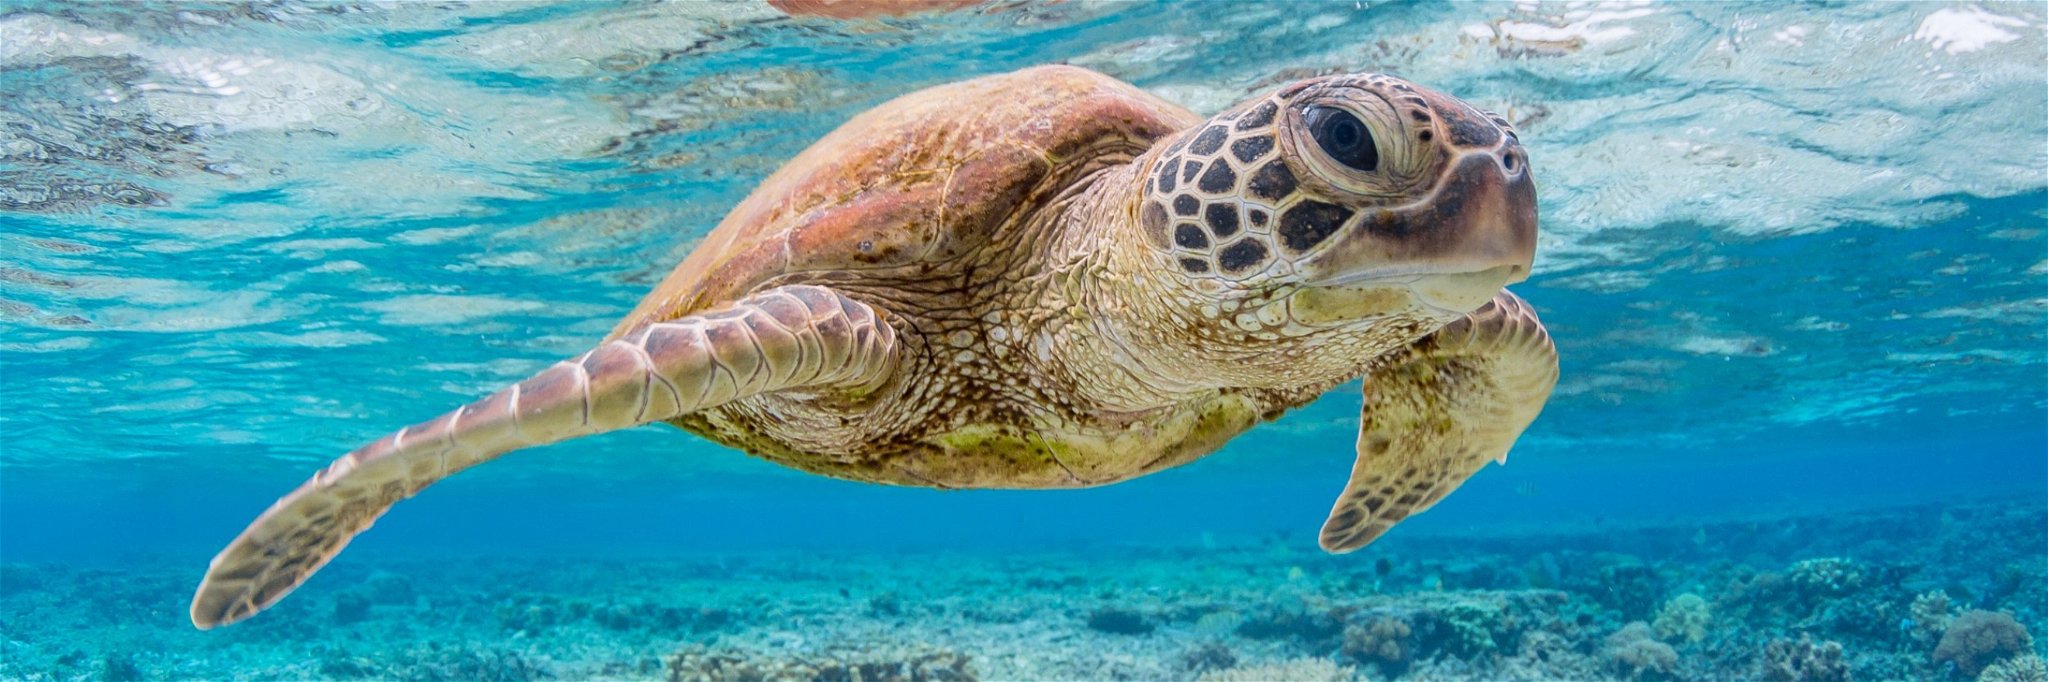 The Galapagos Islands is home to exotic wildlife like sea turtles.